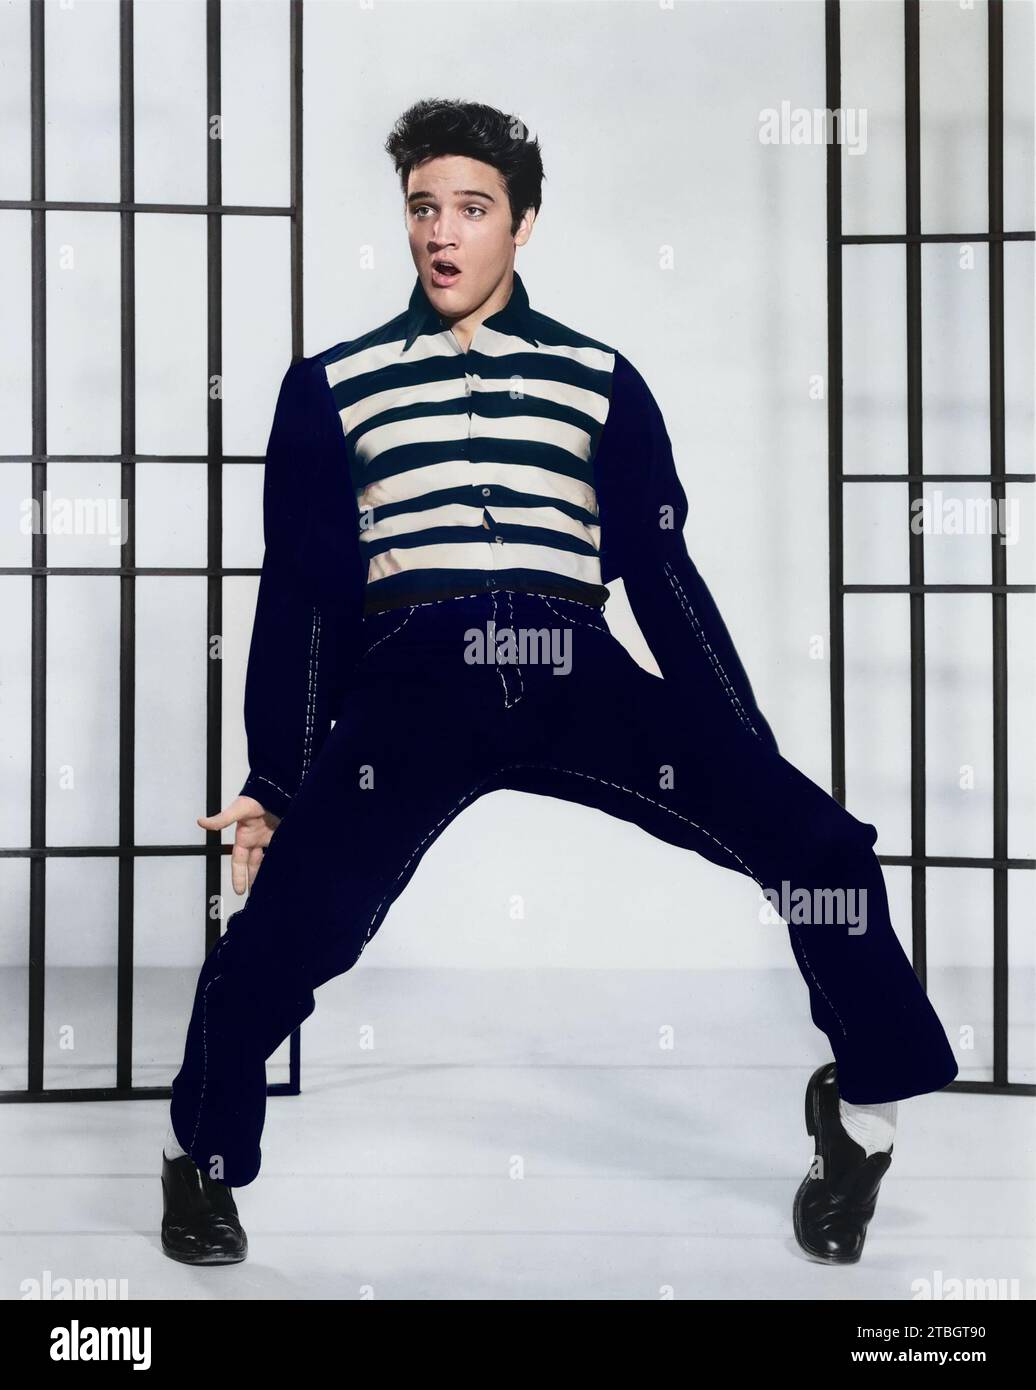 King Rock and Roll - Elvis Presley on the film set of Jailhouse Rock, 1957 - colorized version. Stock Photo